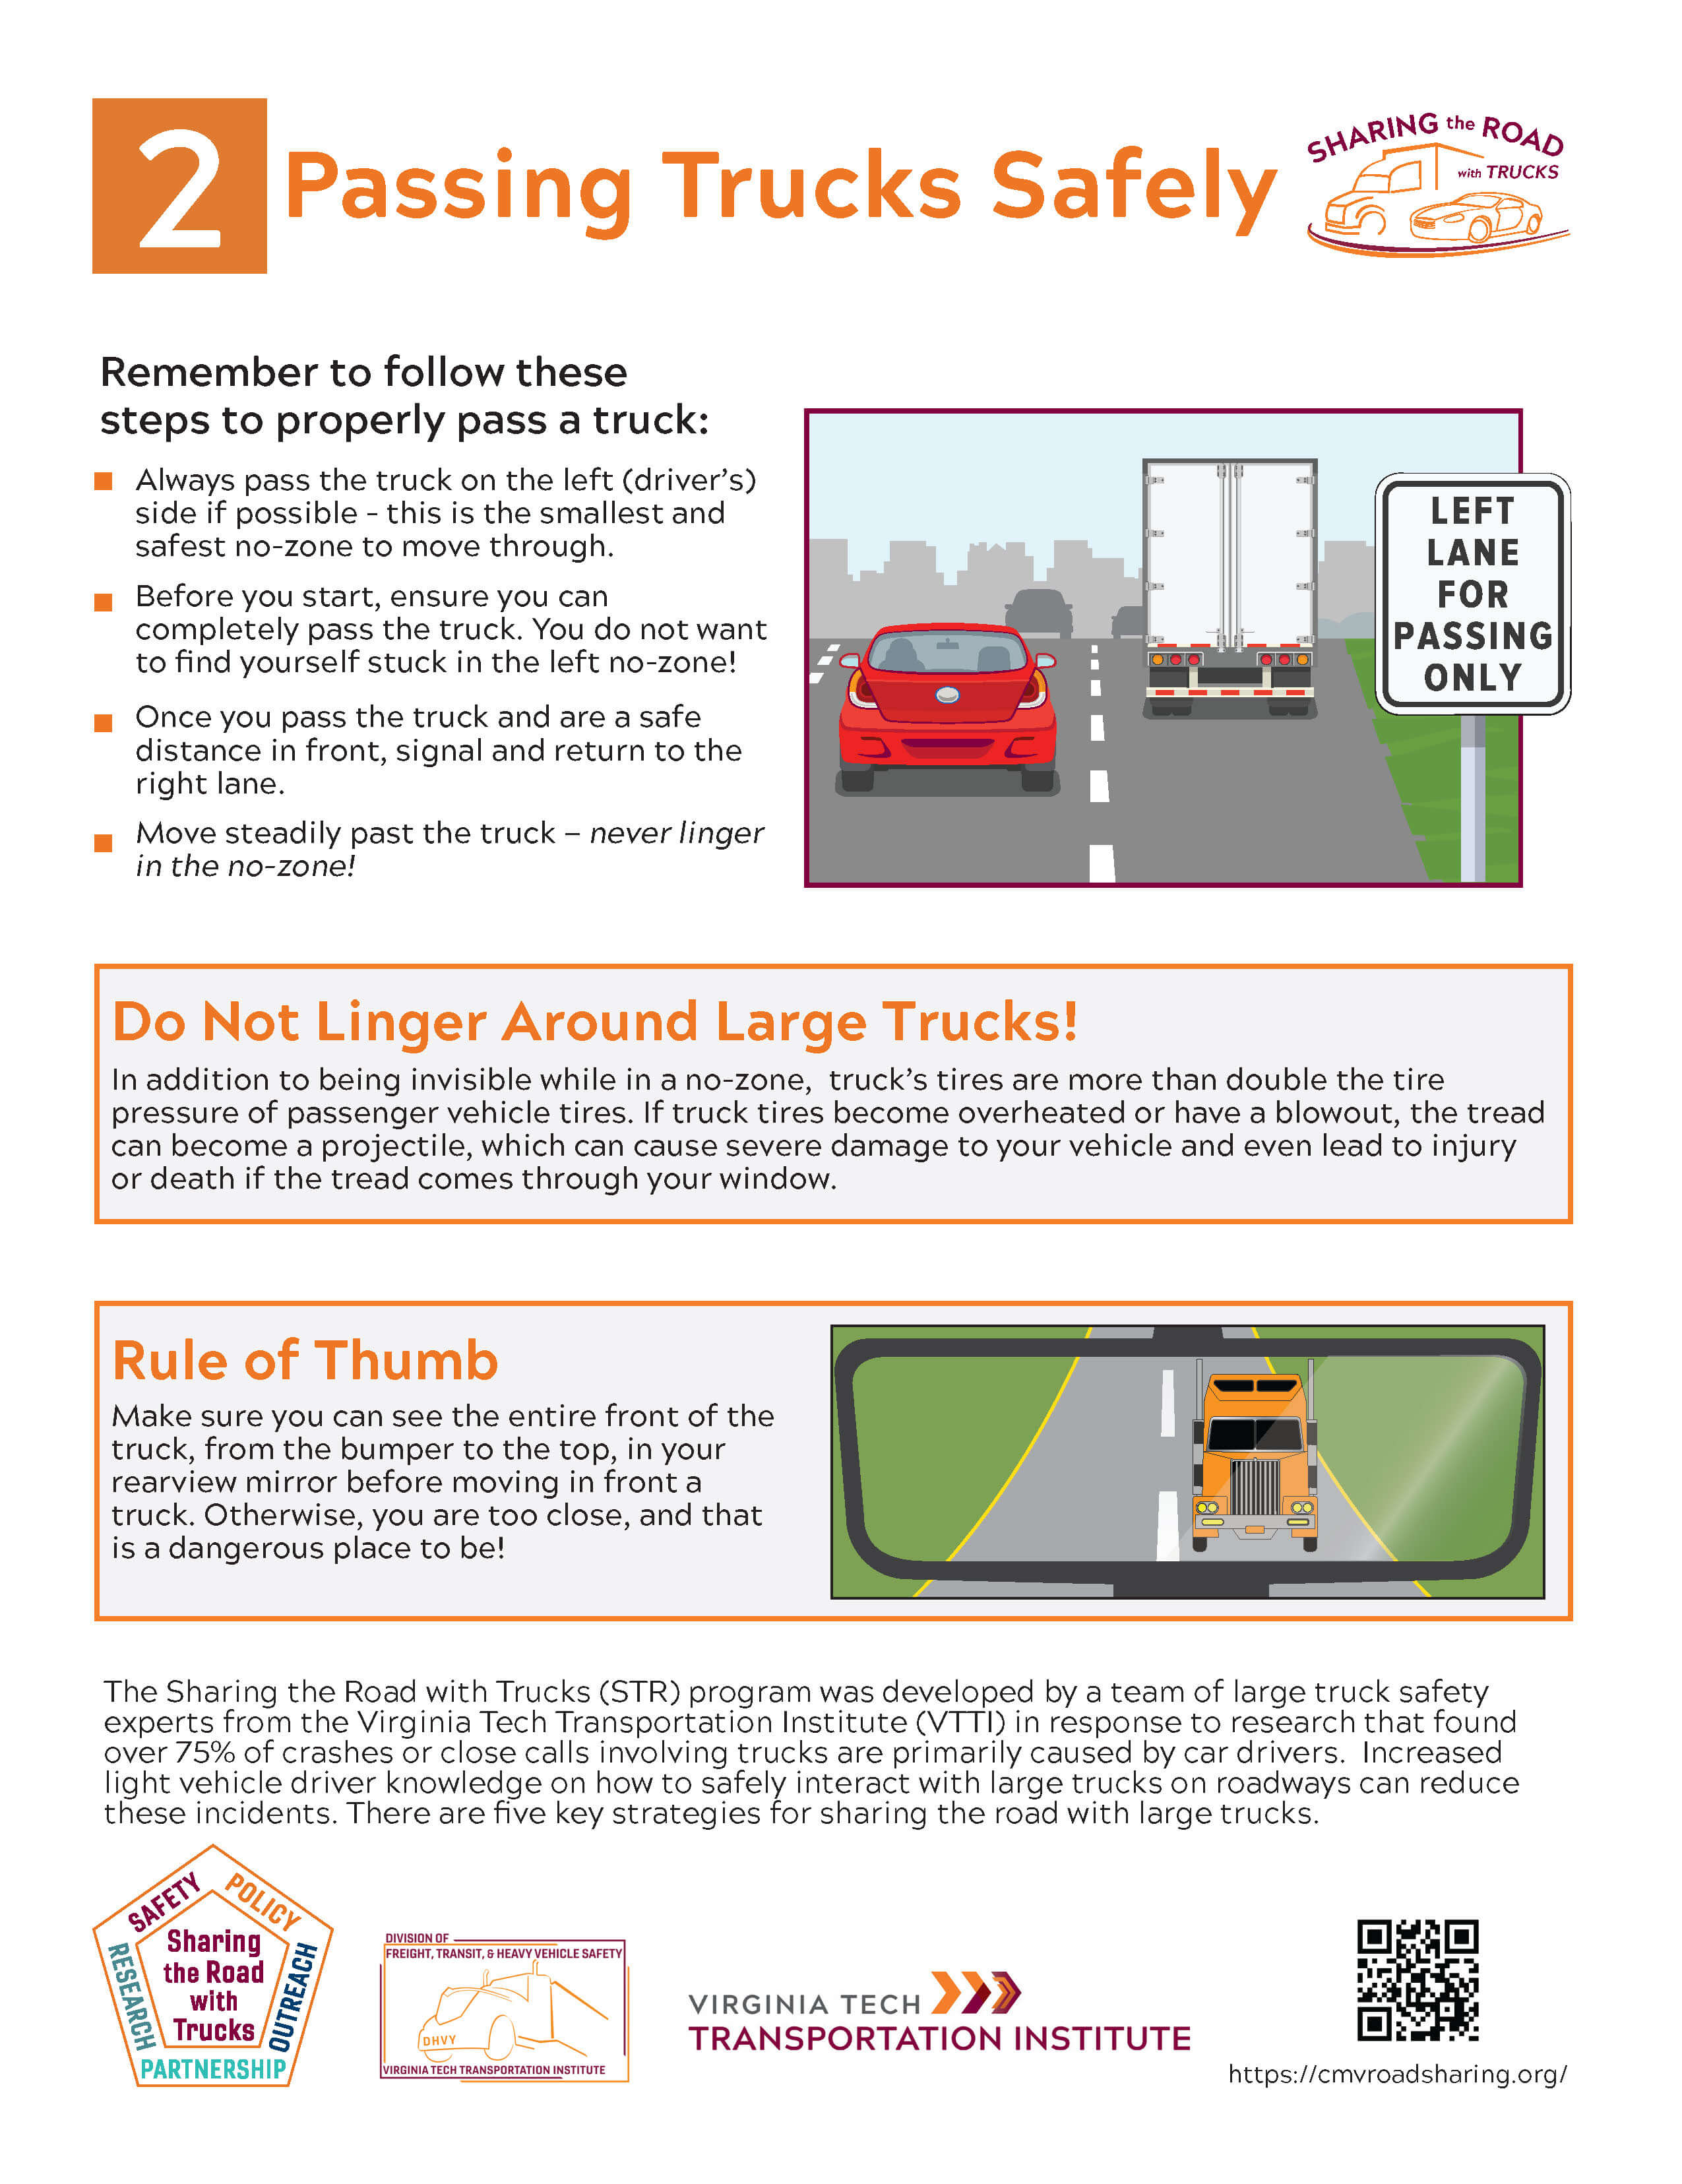 Thumbnail of a one-pager about passing trucks safely